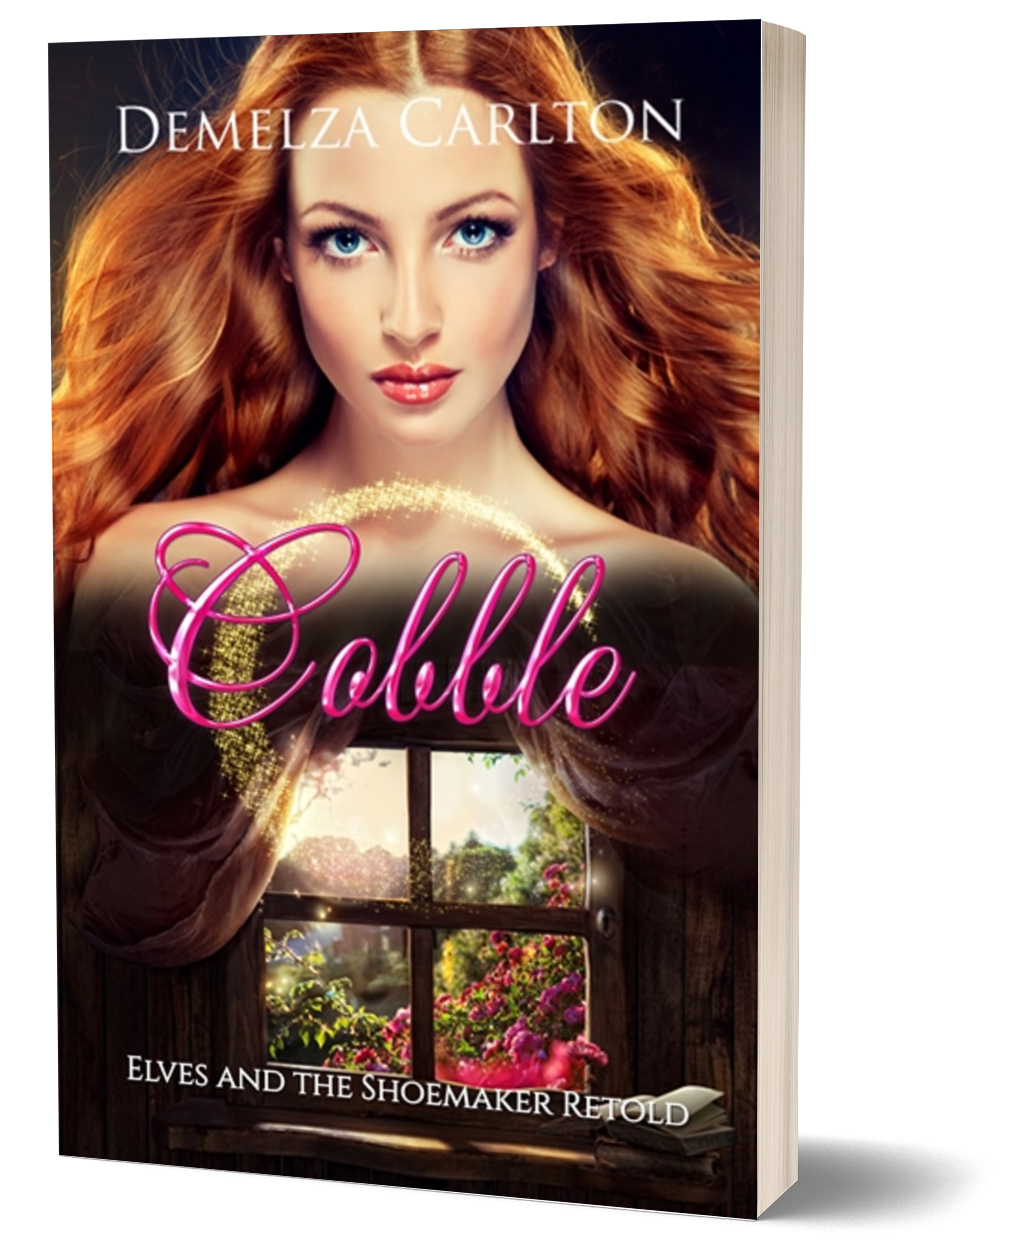 Cobble: Elves and the Shoemaker Retold (Book 18 in the Romance a Medieval Fairytale series) PAPERBACK